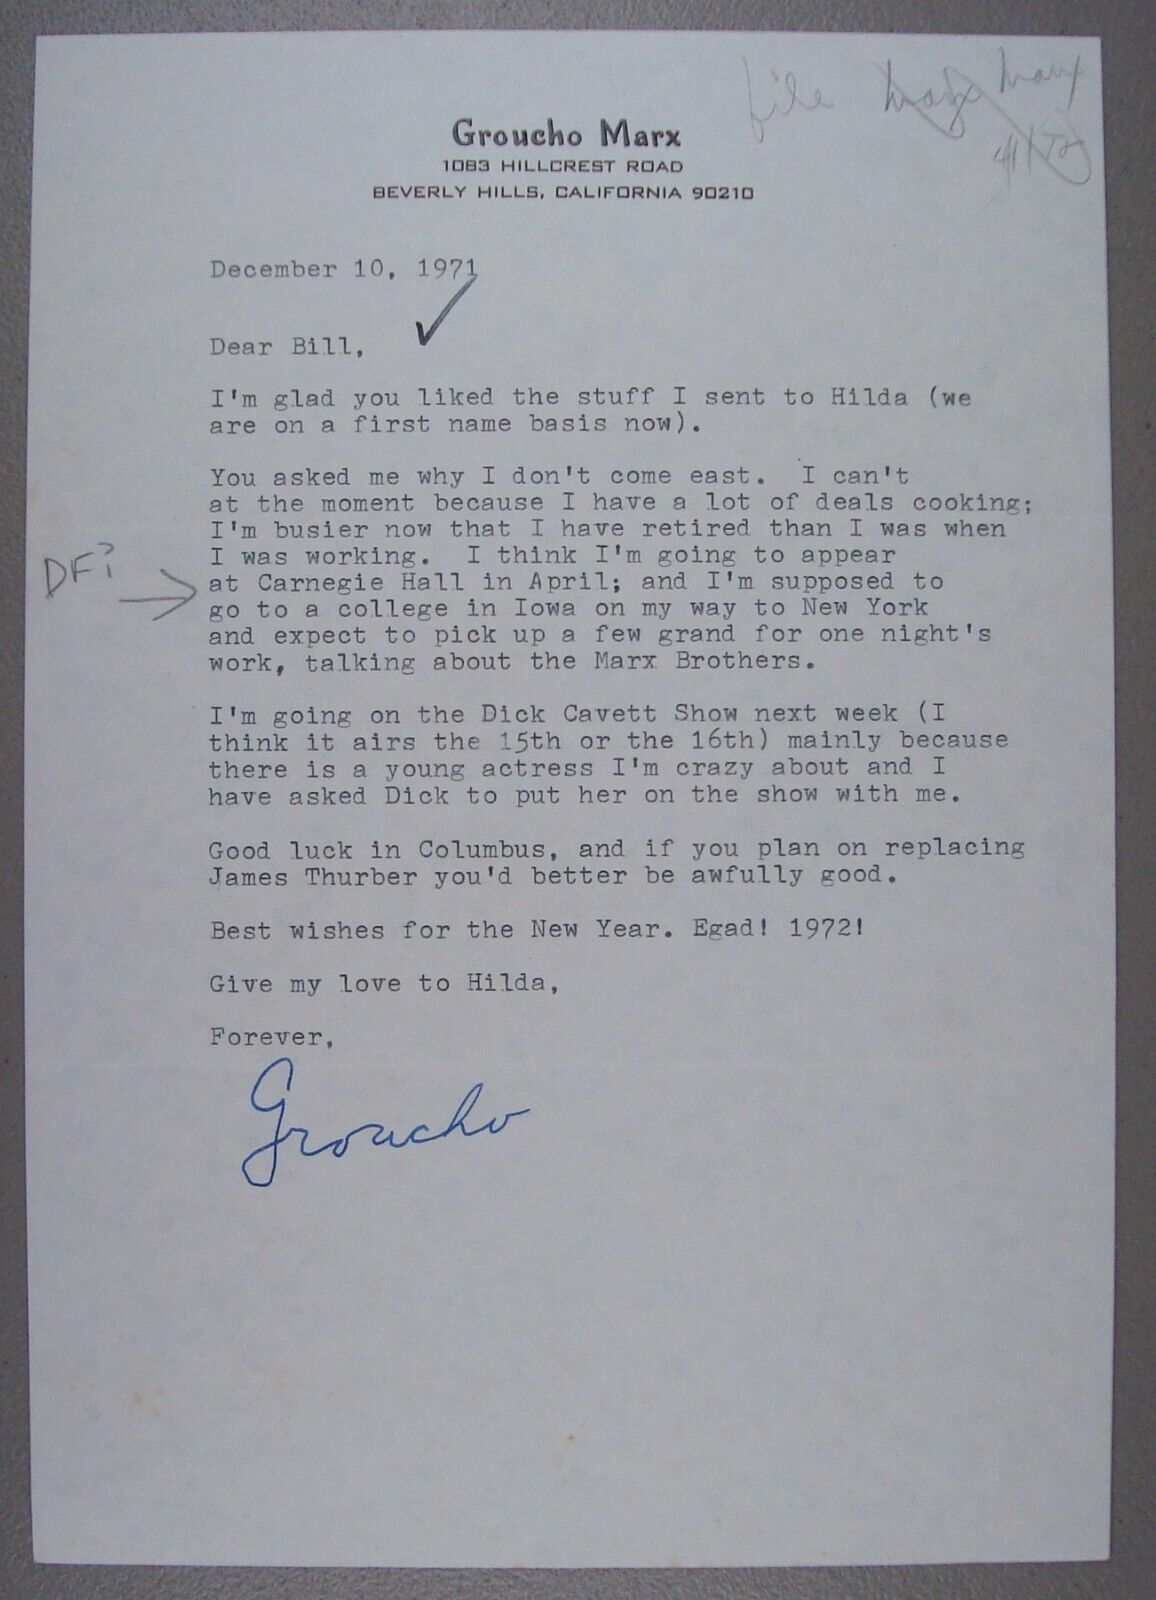 1971 Groucho Marx Signed Autograped Auto Letter to His Publisher Superb Content